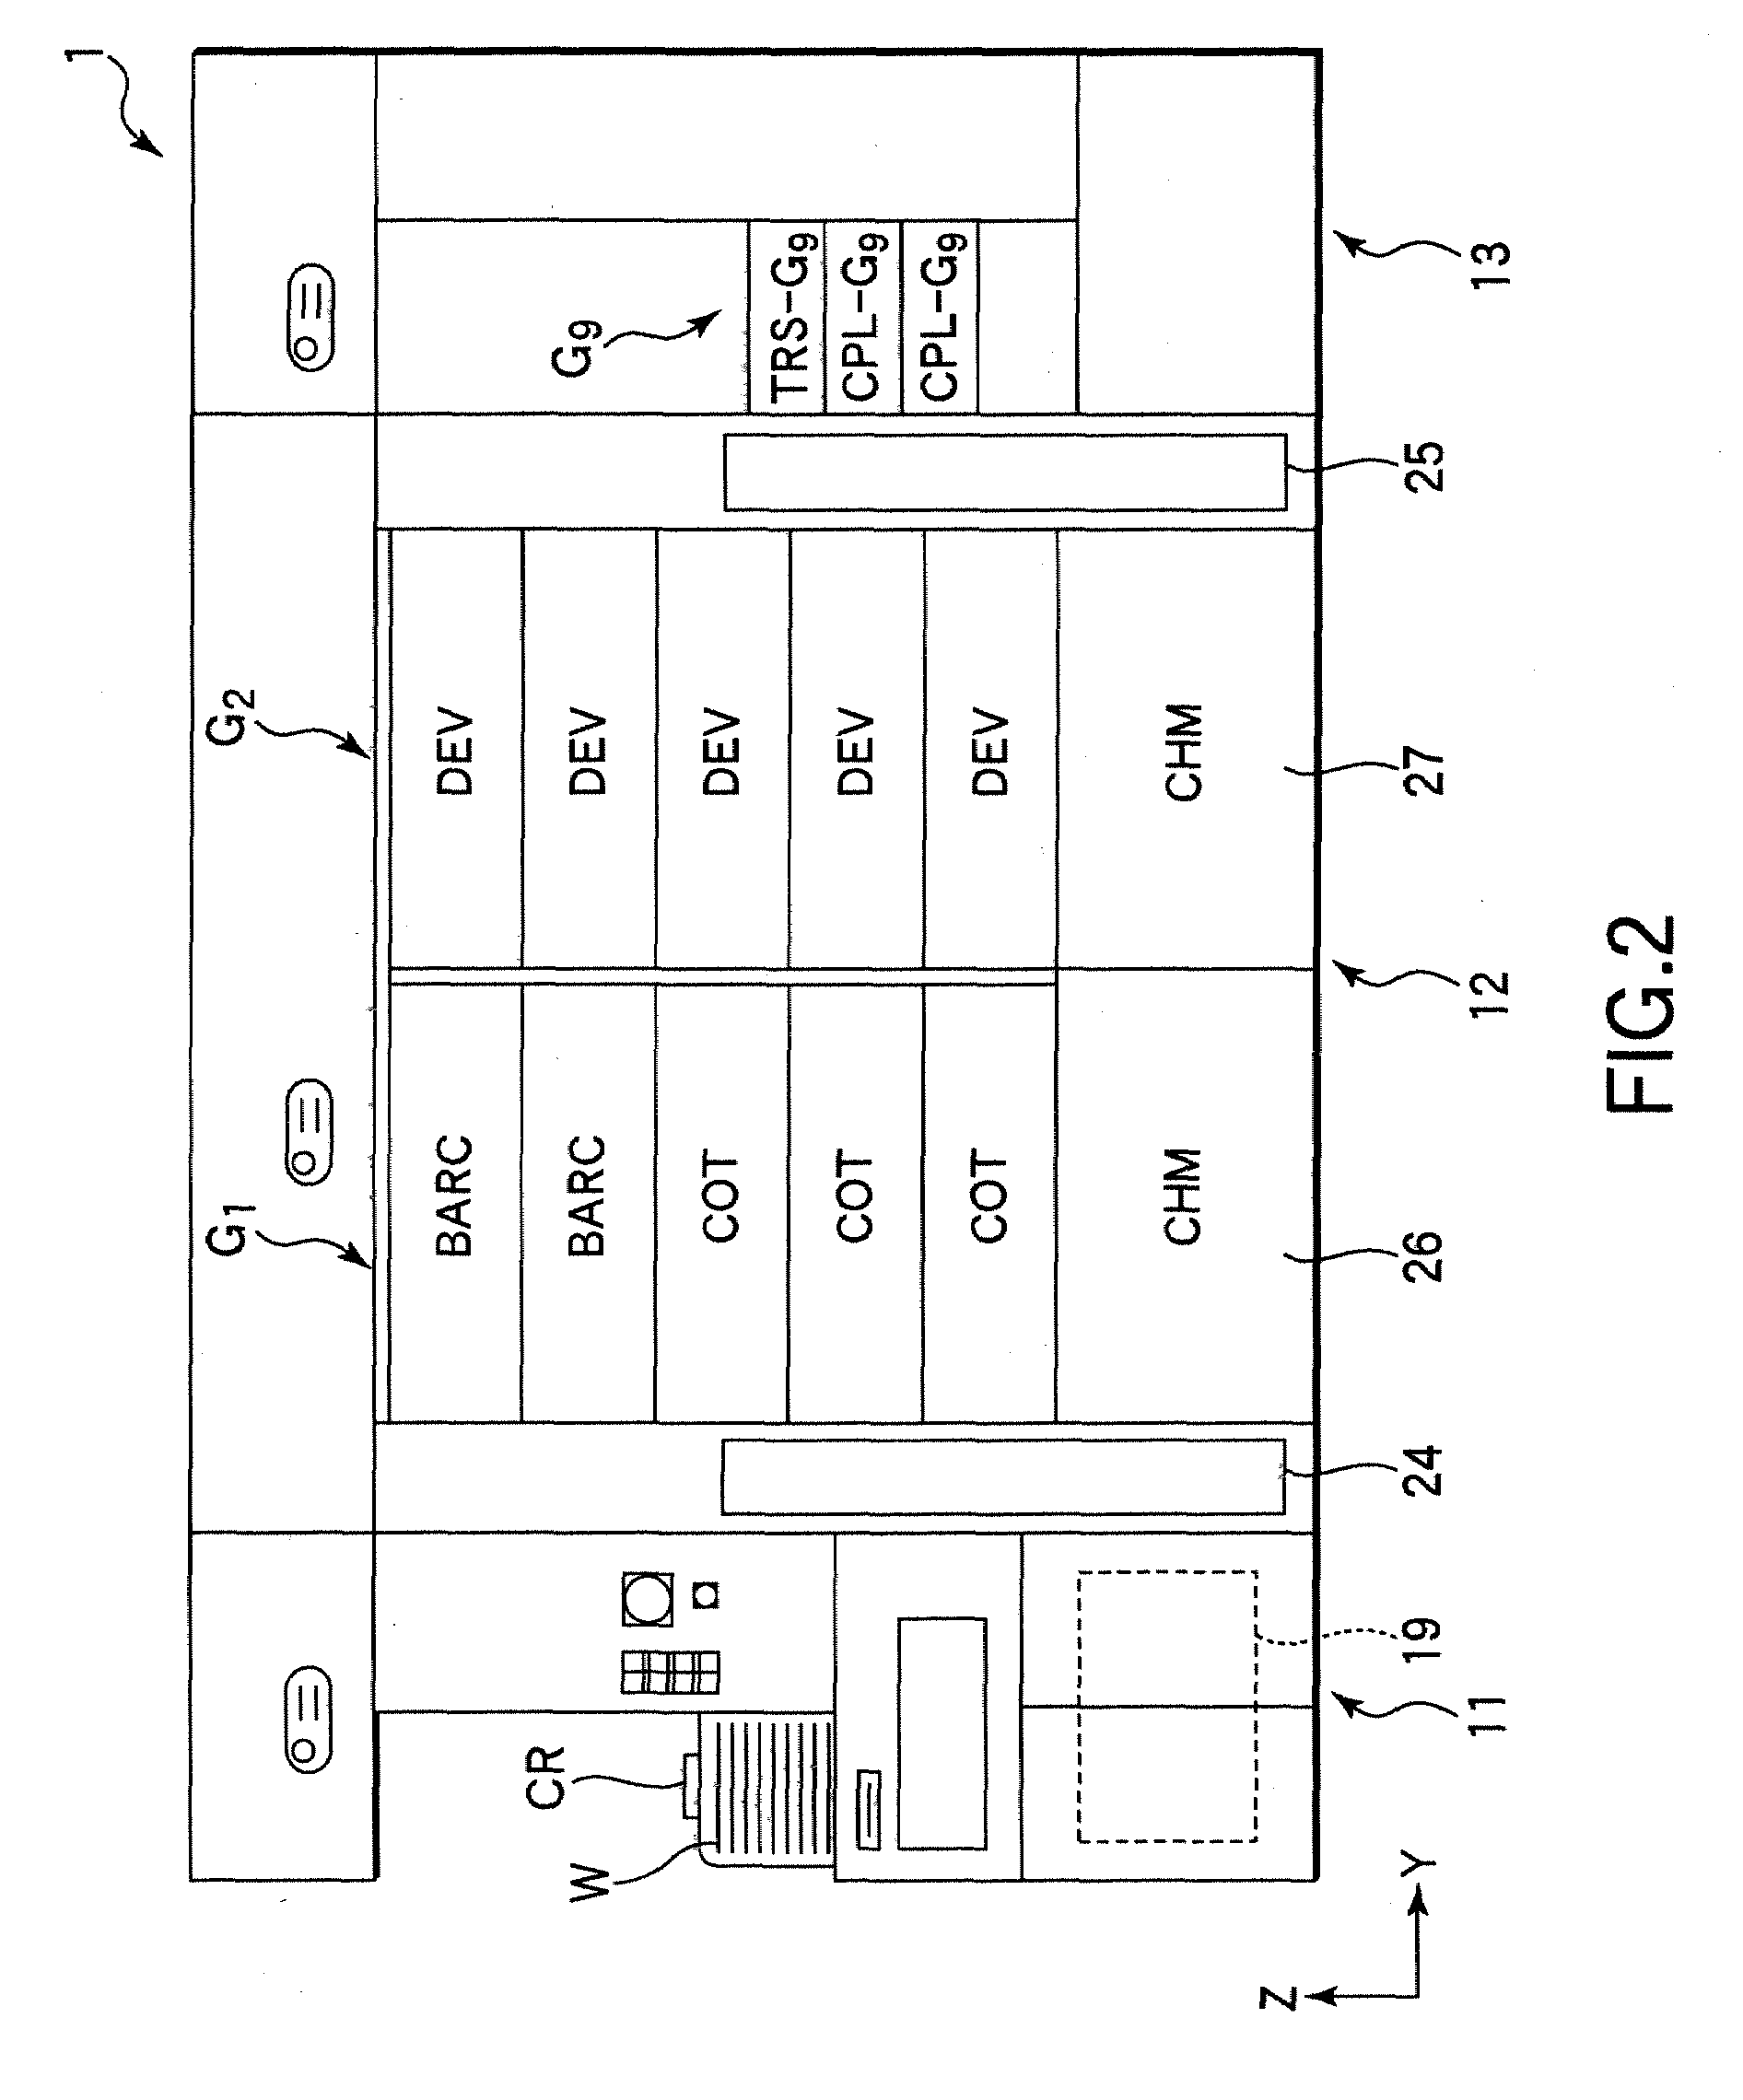 Temperature control for performing heat process on resist film